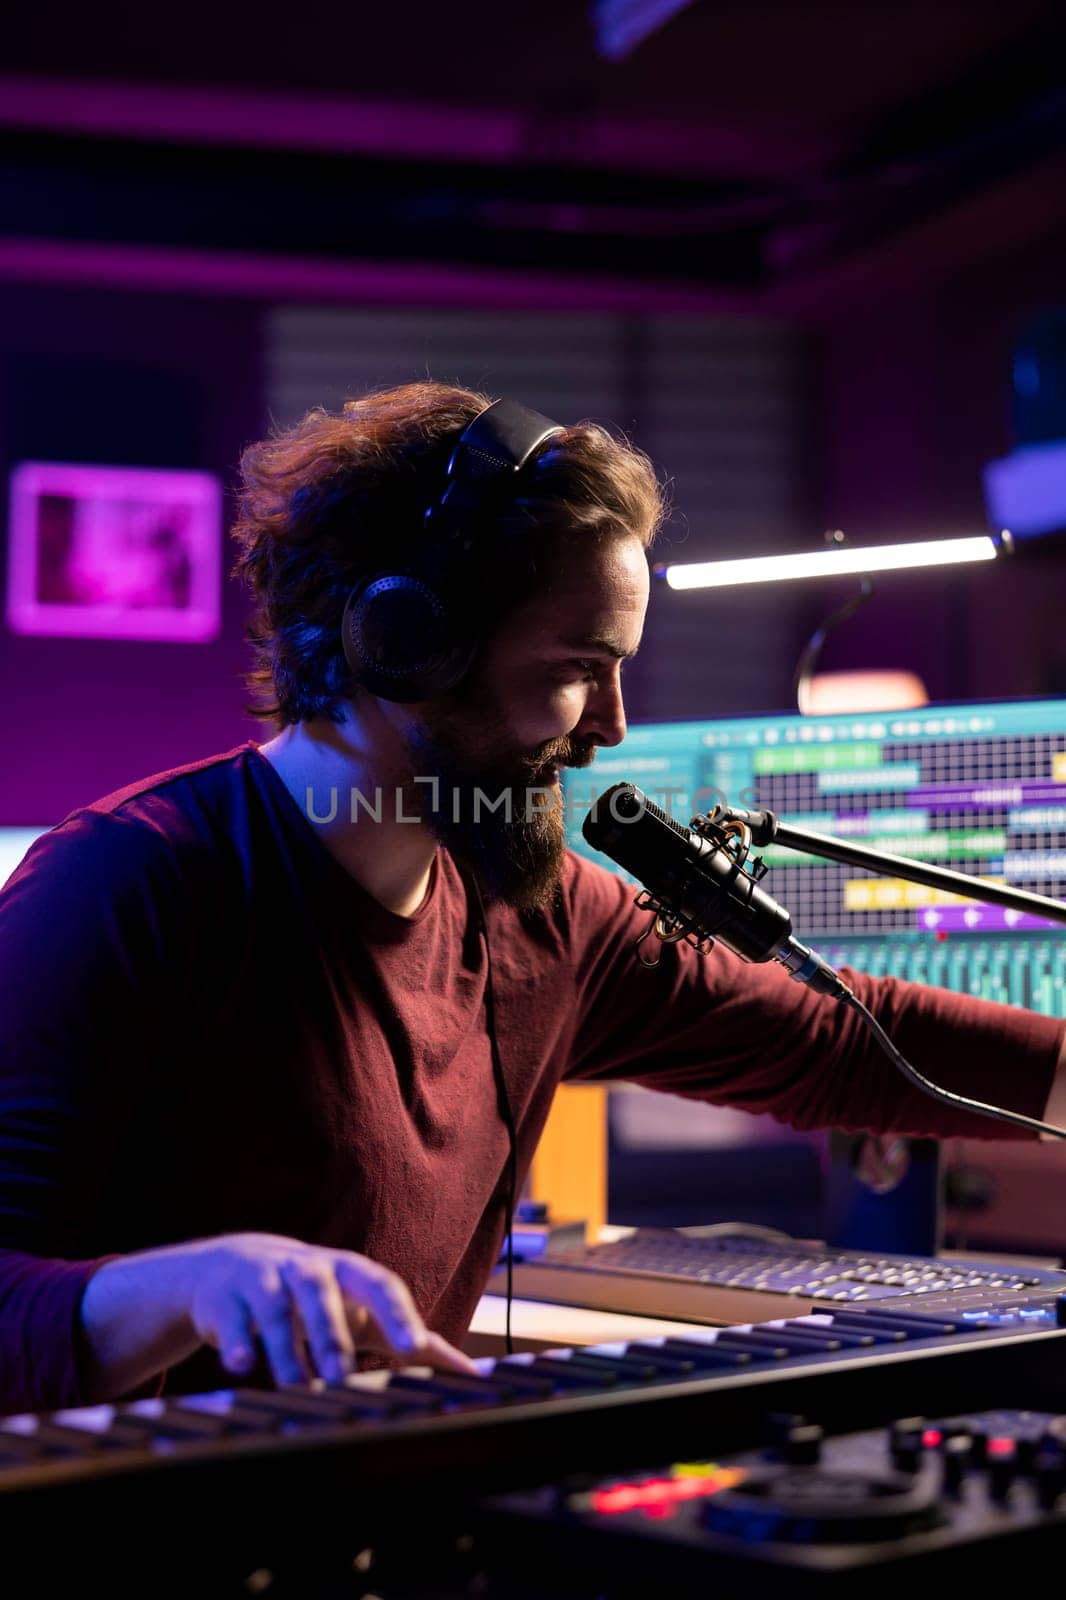 Sound engineer recording piano keys notes and singing on microphone, producing new music with electronic gear. Musician composing songs on midi controller, home studio equipment.